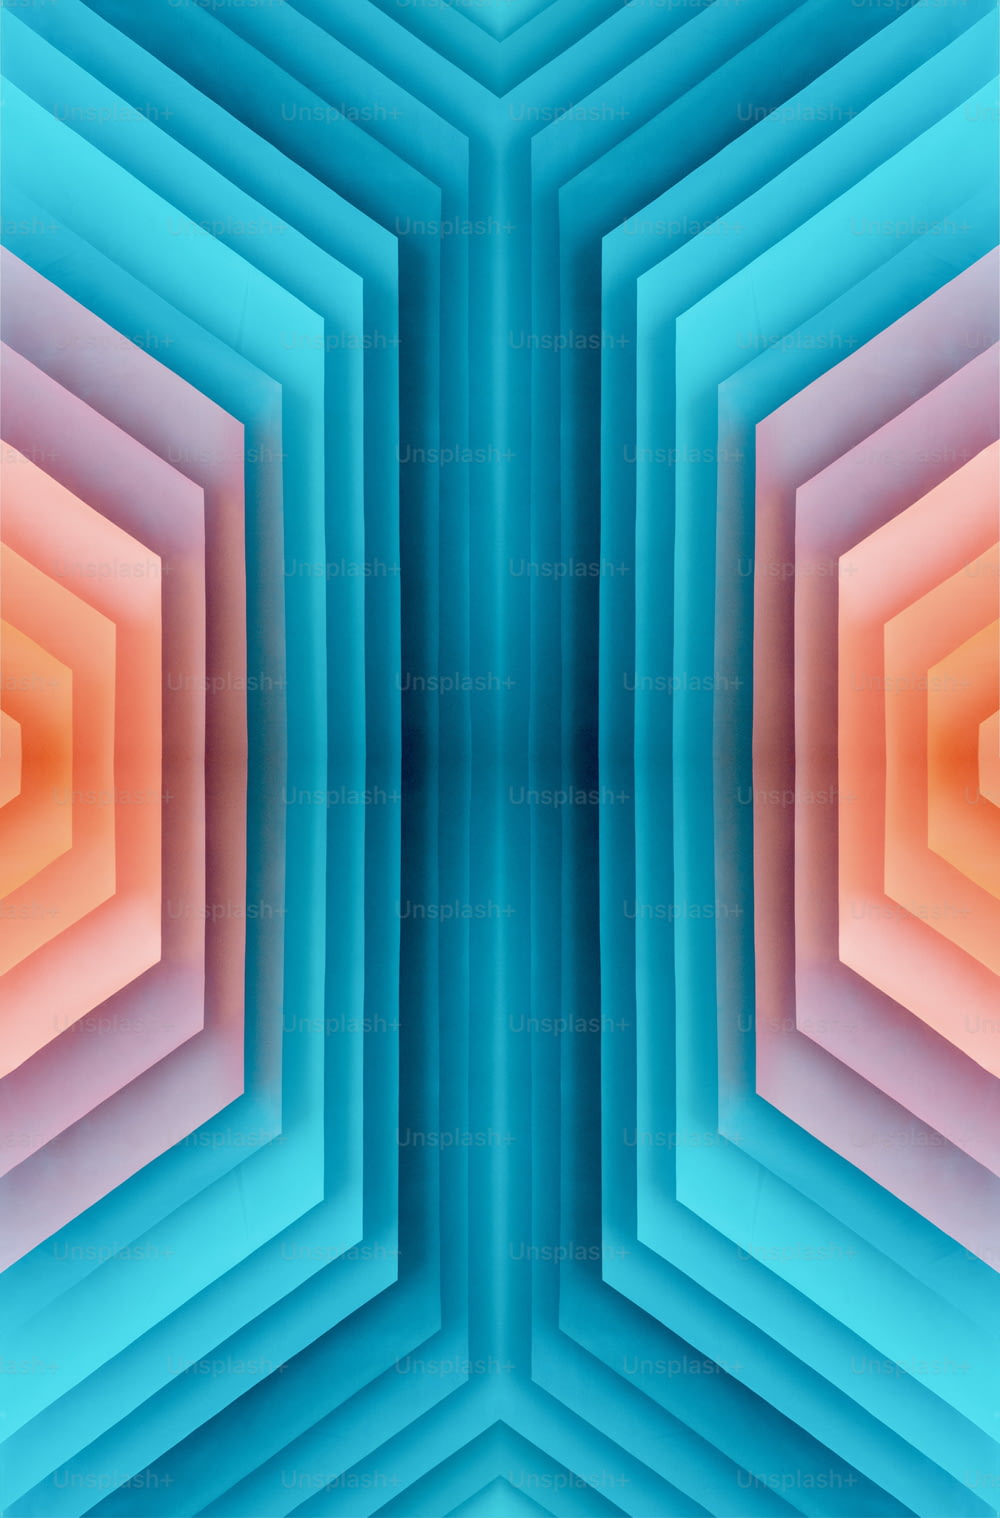 an abstract image of a blue and orange hexagonal structure